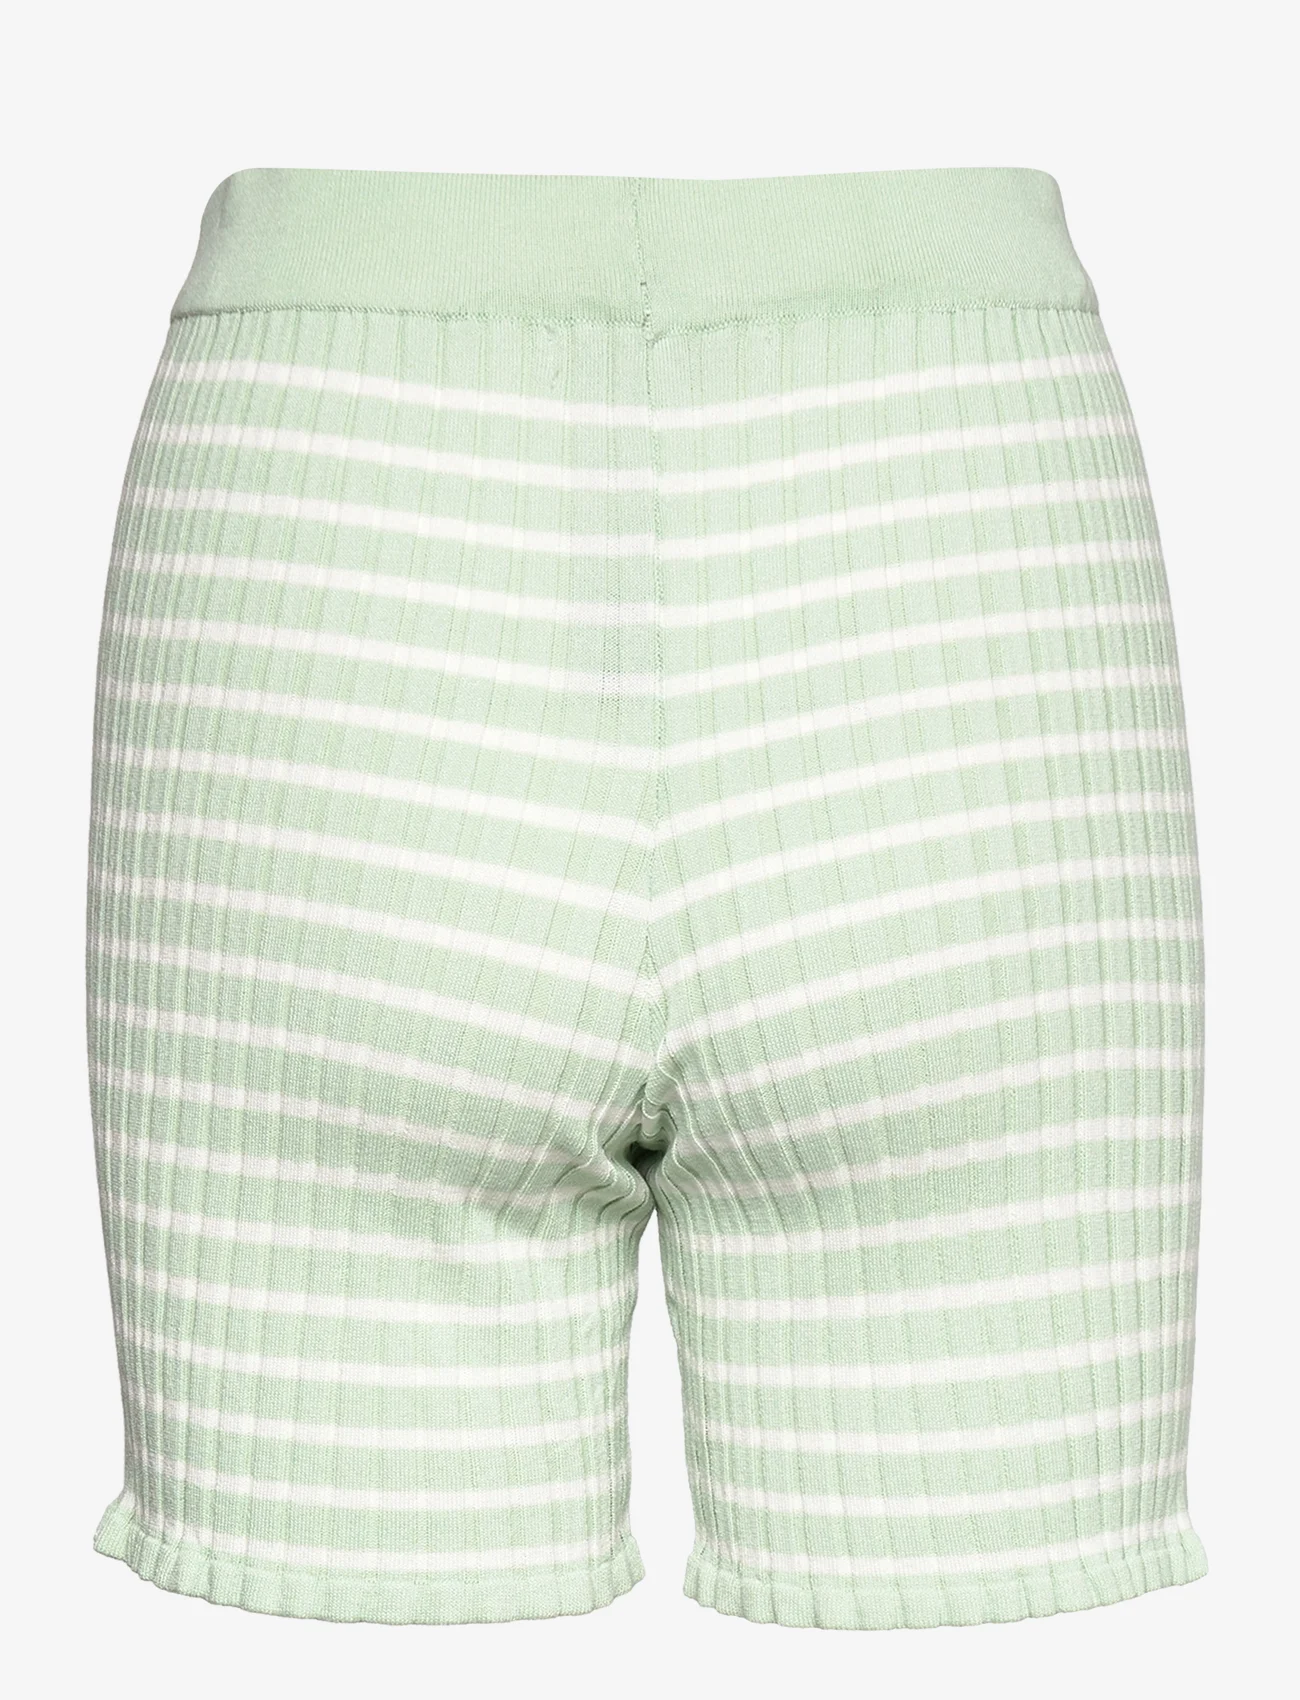 A-View - Sira shorts - lühikesed vabaajapüksid - pale mint/off white - 1